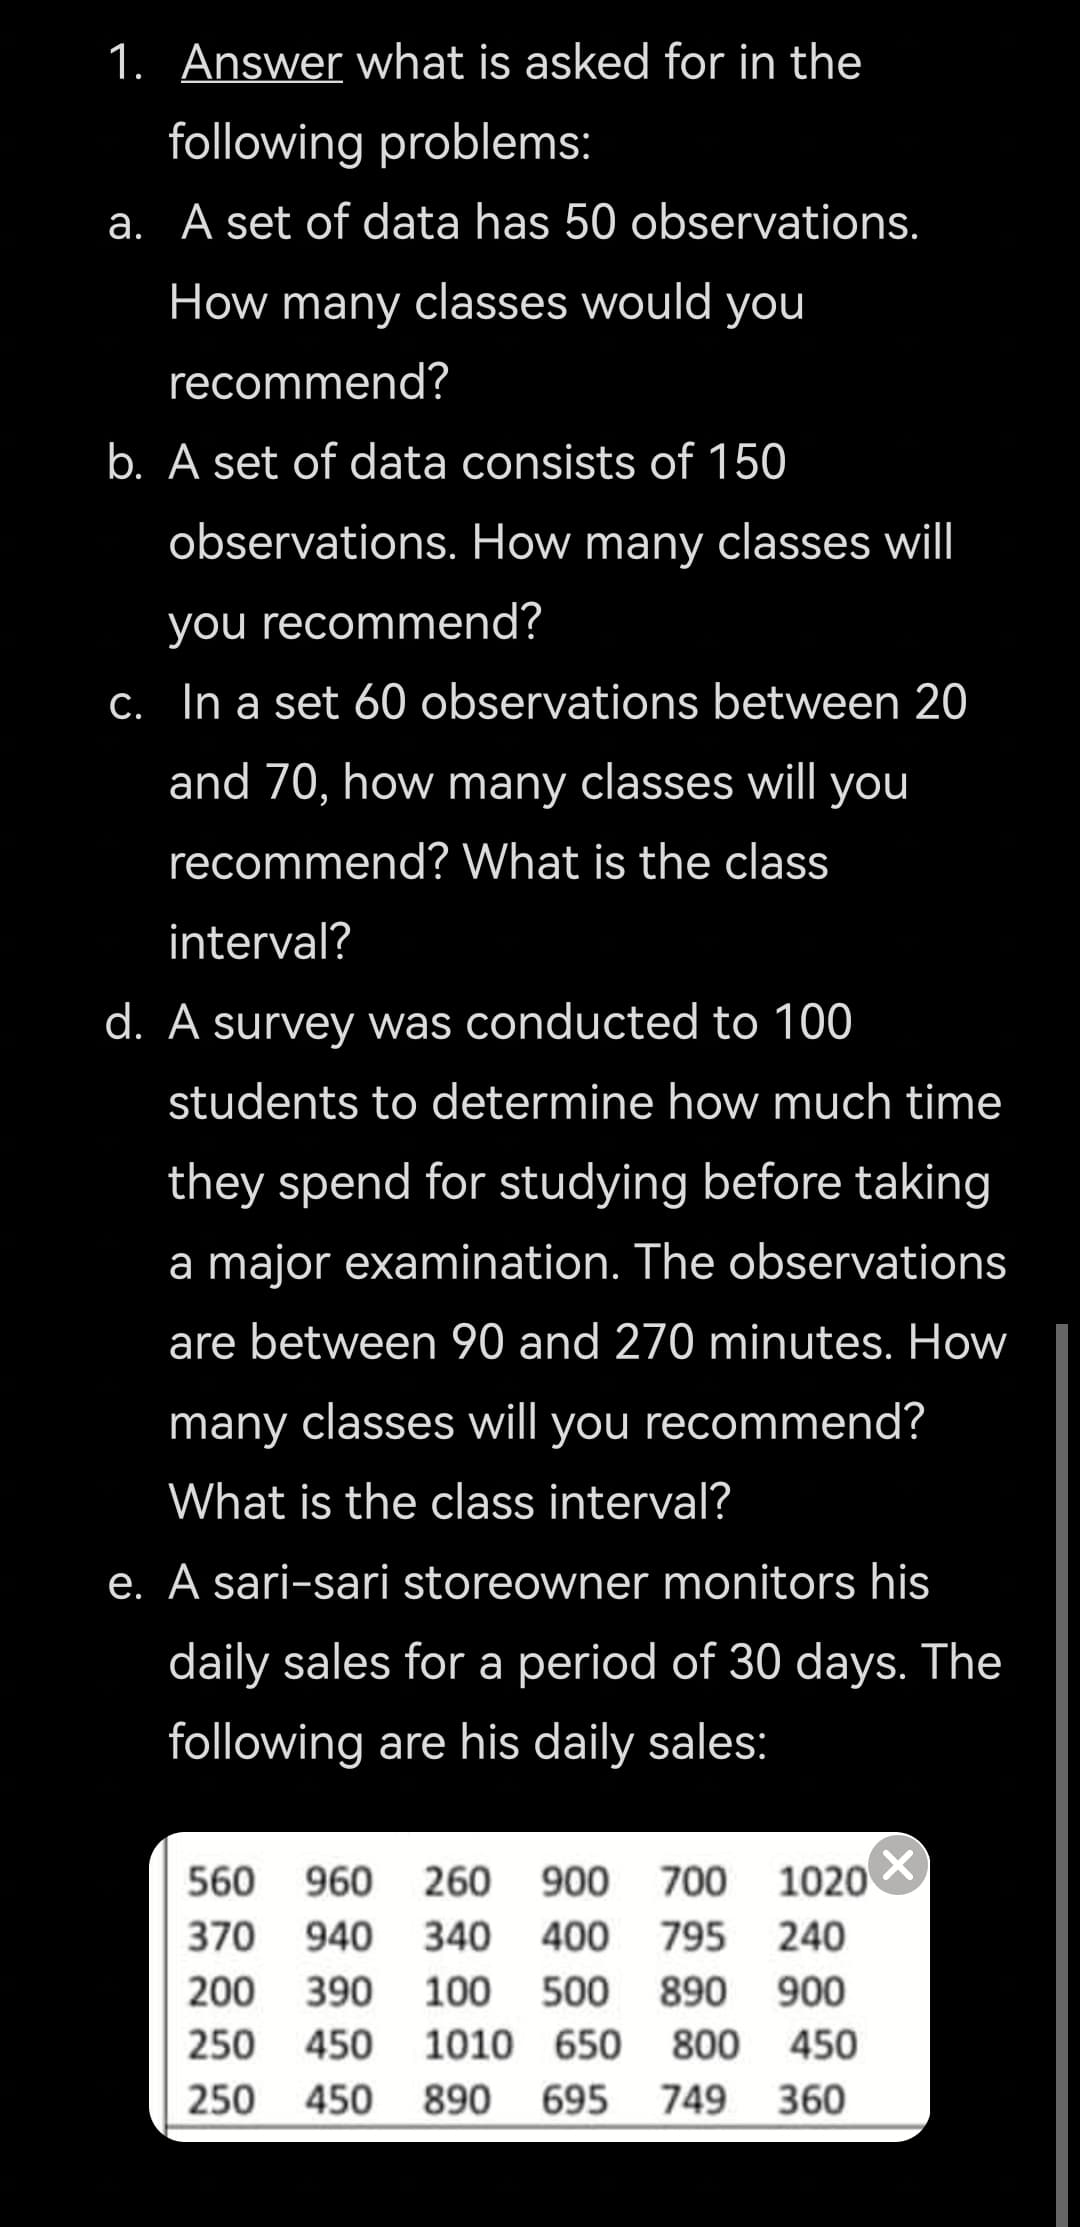 1. Answer what is asked for in the
following problems:
a. A set of data has 50 observations.
How many classes would you
recommend?
b. A set of data consists of 150
observations. How many classes will
you recommend?
C. In a set 60 observations between 20
and 70, how many classes will you
recommend? What is the class
interval?
d. A survey was conducted to 100
students to determine how much time
they spend for studying before taking
a major examination. The observations
are between 90 and 270 minutes. How
many classes will you recommend?
What is the class interval?
e. A sari-sari storeowner monitors his
daily sales for a period of 30 days. The
following are his daily sales:
560
960
260
900 700
1020
370 940
340
400
795 240
200
390
100
500
890 900
250
450
1010 650
800 450
250 450
890
695 749 360
